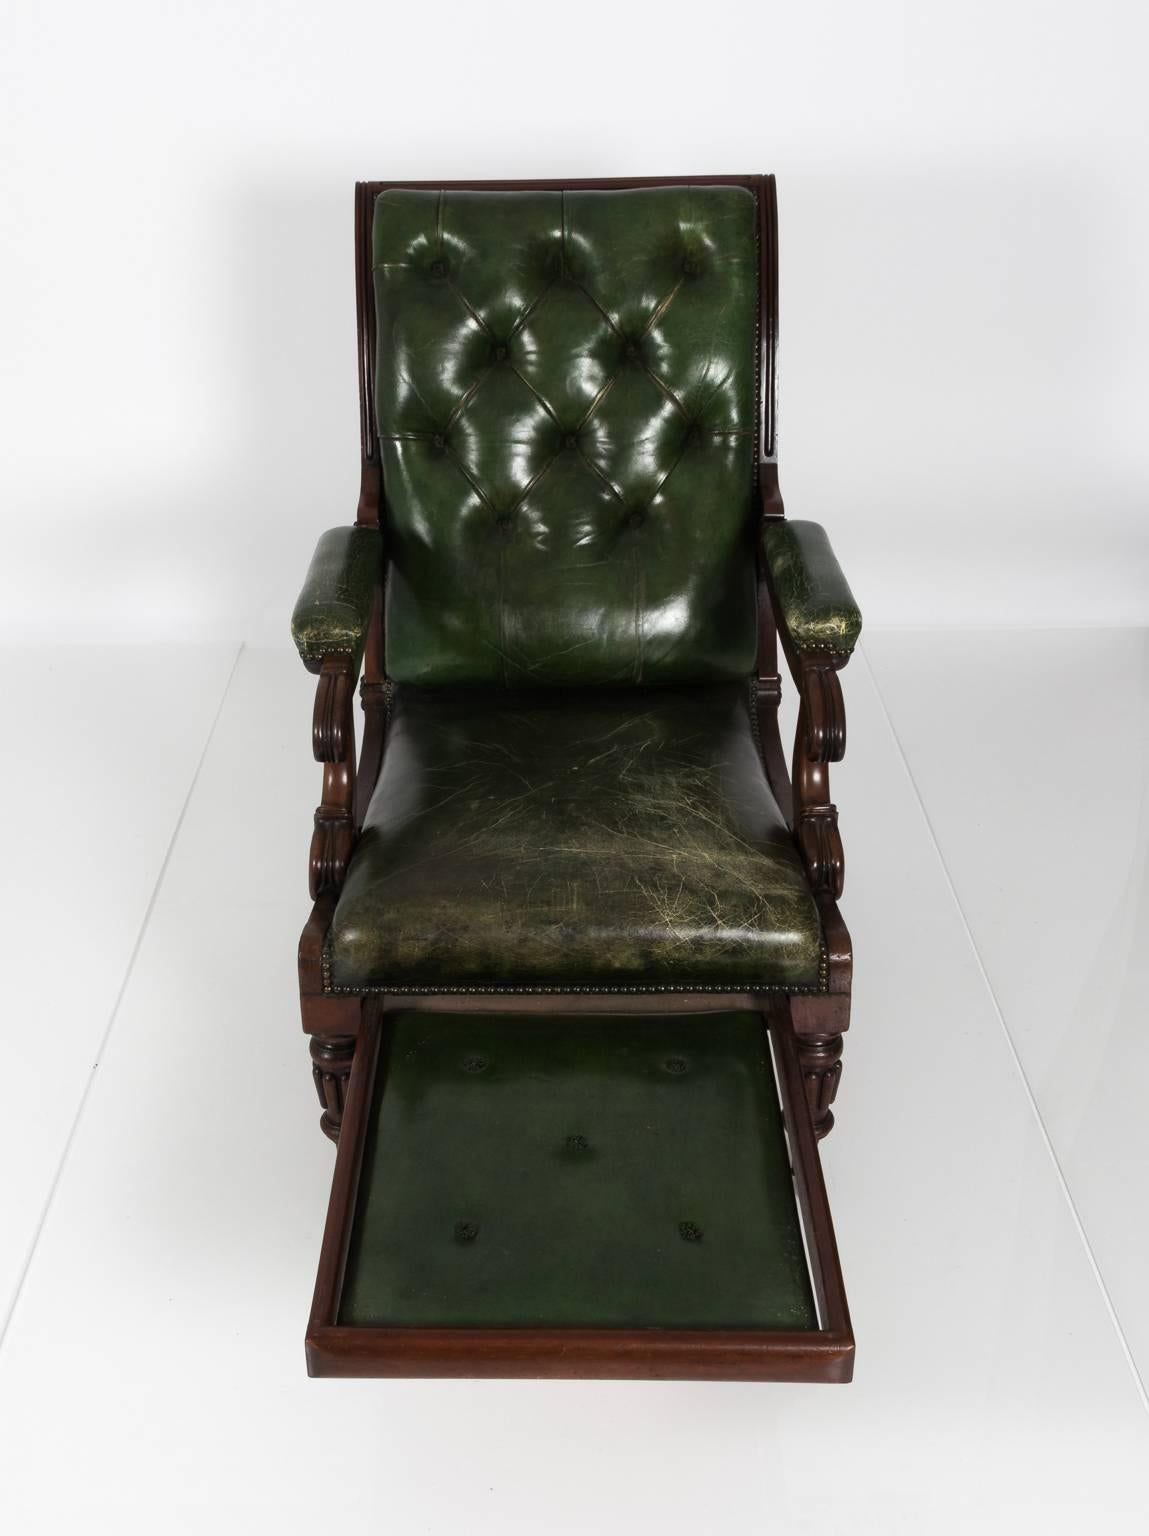 William IV style green leather chair that features a pull out reclining footrest, circa 1840.
 